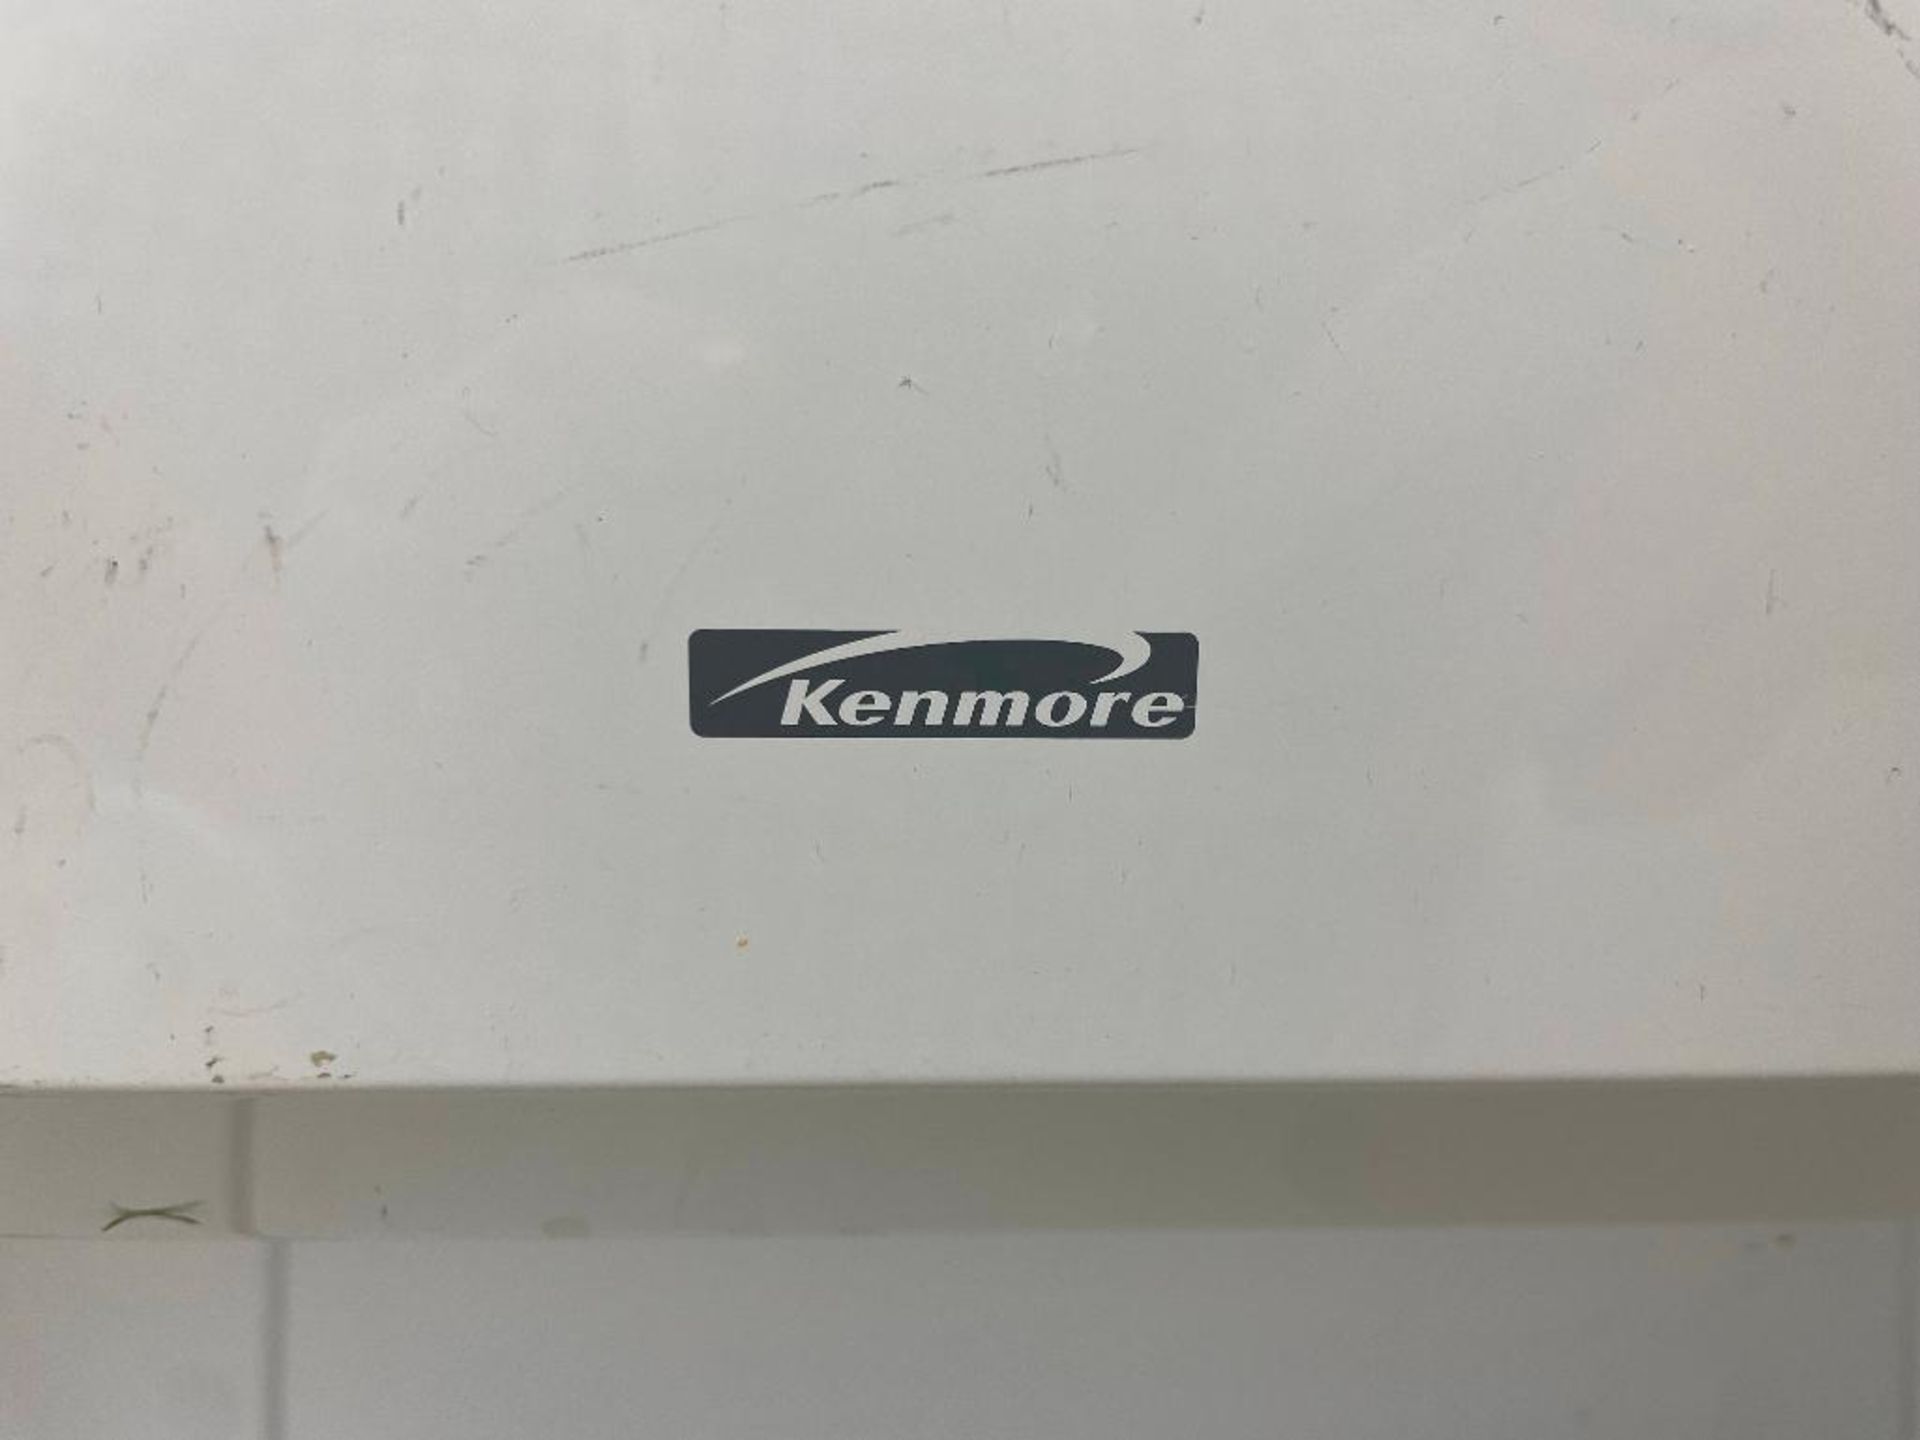 DESCRIPTION: KENMORE HOUSE HOLD WASHING MACHINE AND DRYER UNIT BRAND / MODEL: KENMORE LOCATION: 4811 - Image 2 of 2